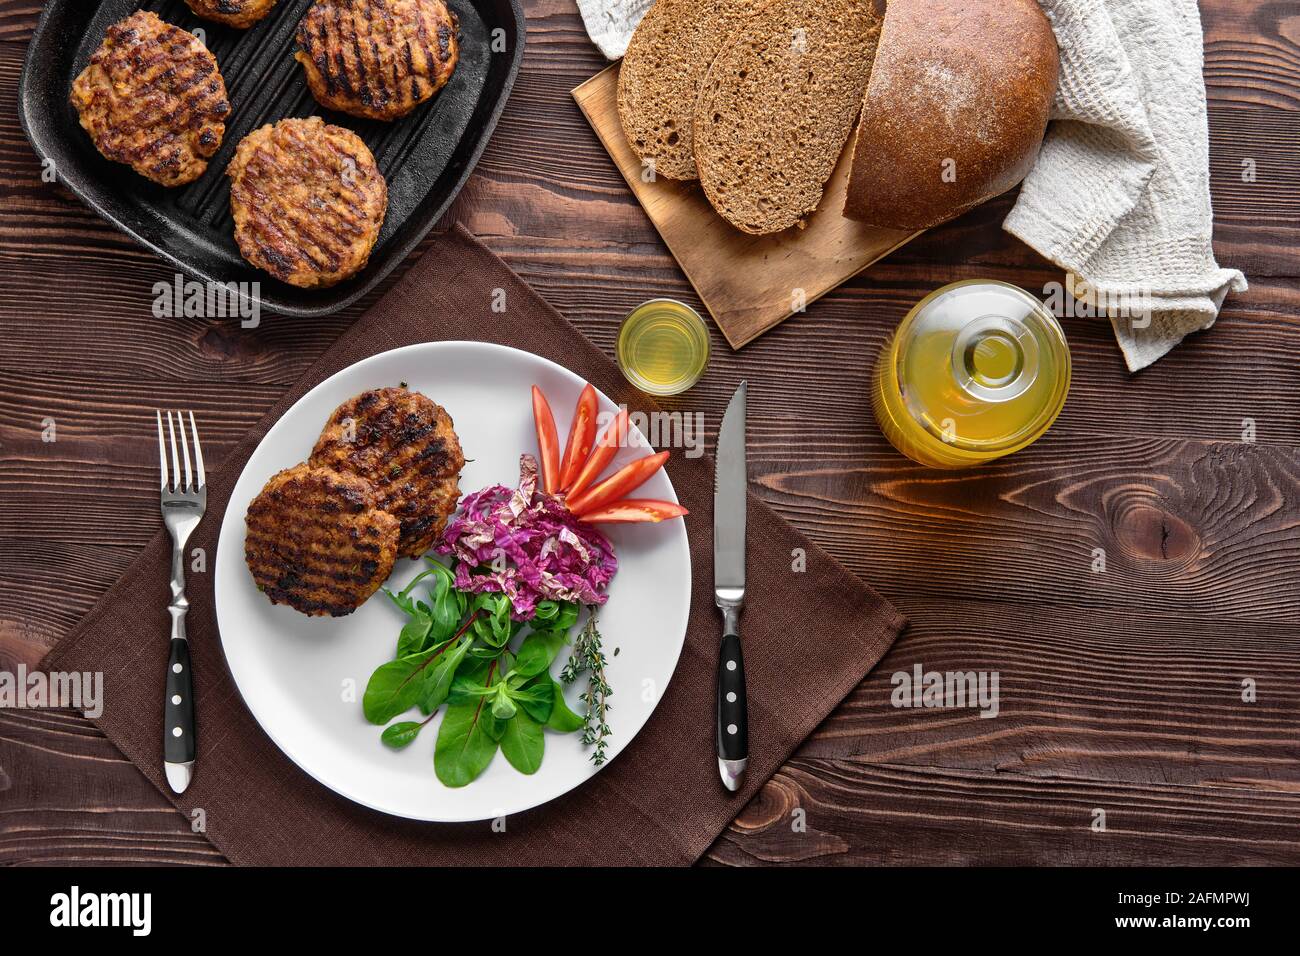 Top view of country dinner with cutlet and fresh salad, brown bread and moonshine on rustic wooden table Stock Photo